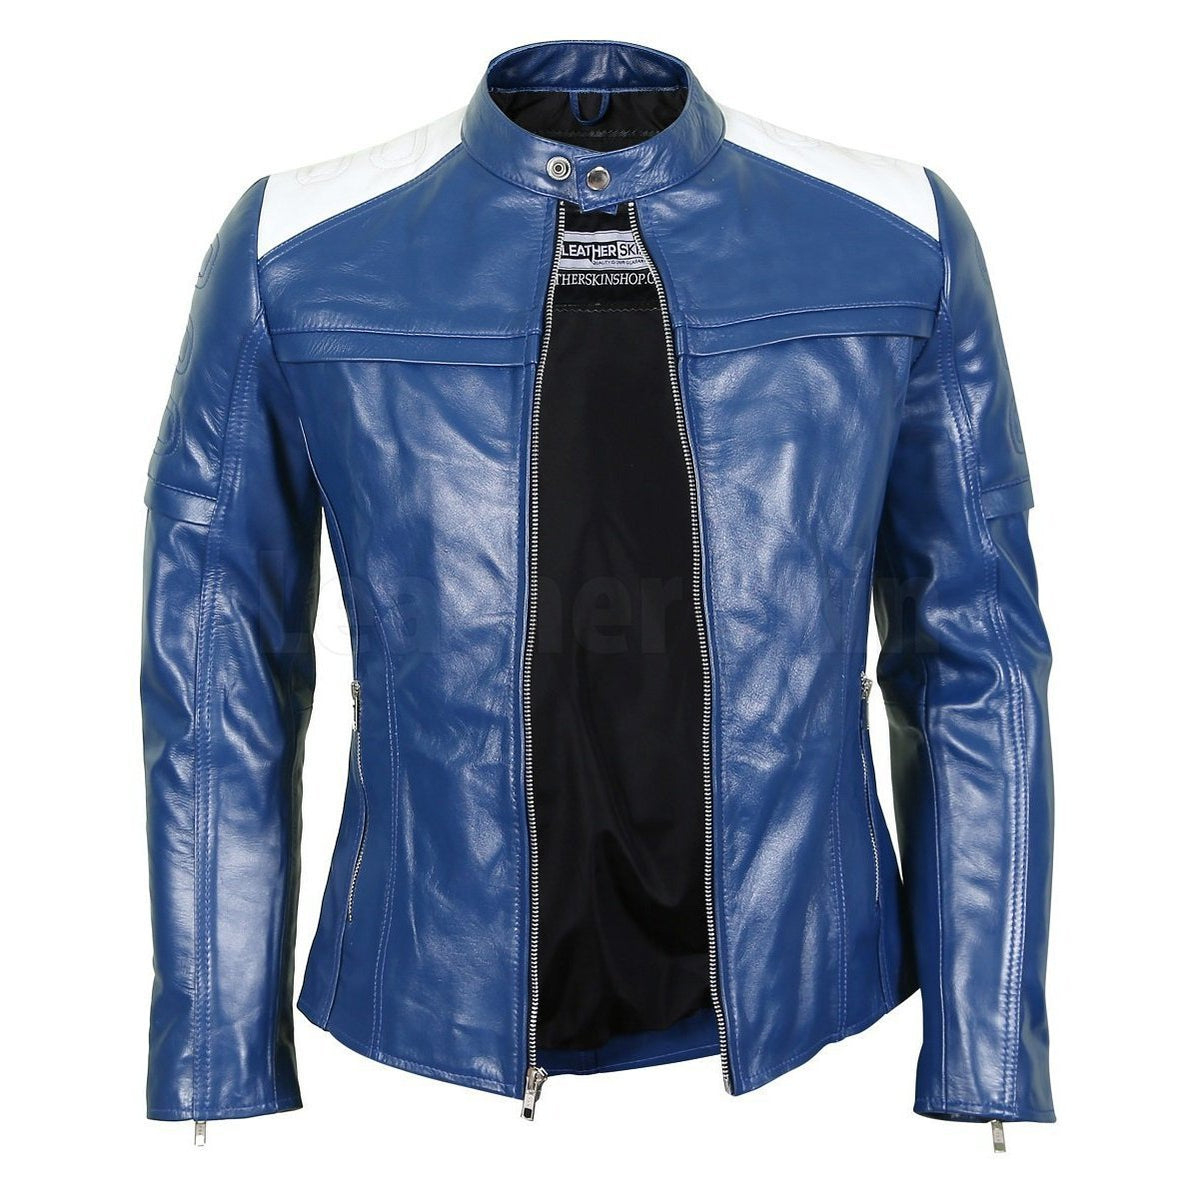 Buy Pink Faux Leather Biker Jacket from the Next UK online shop